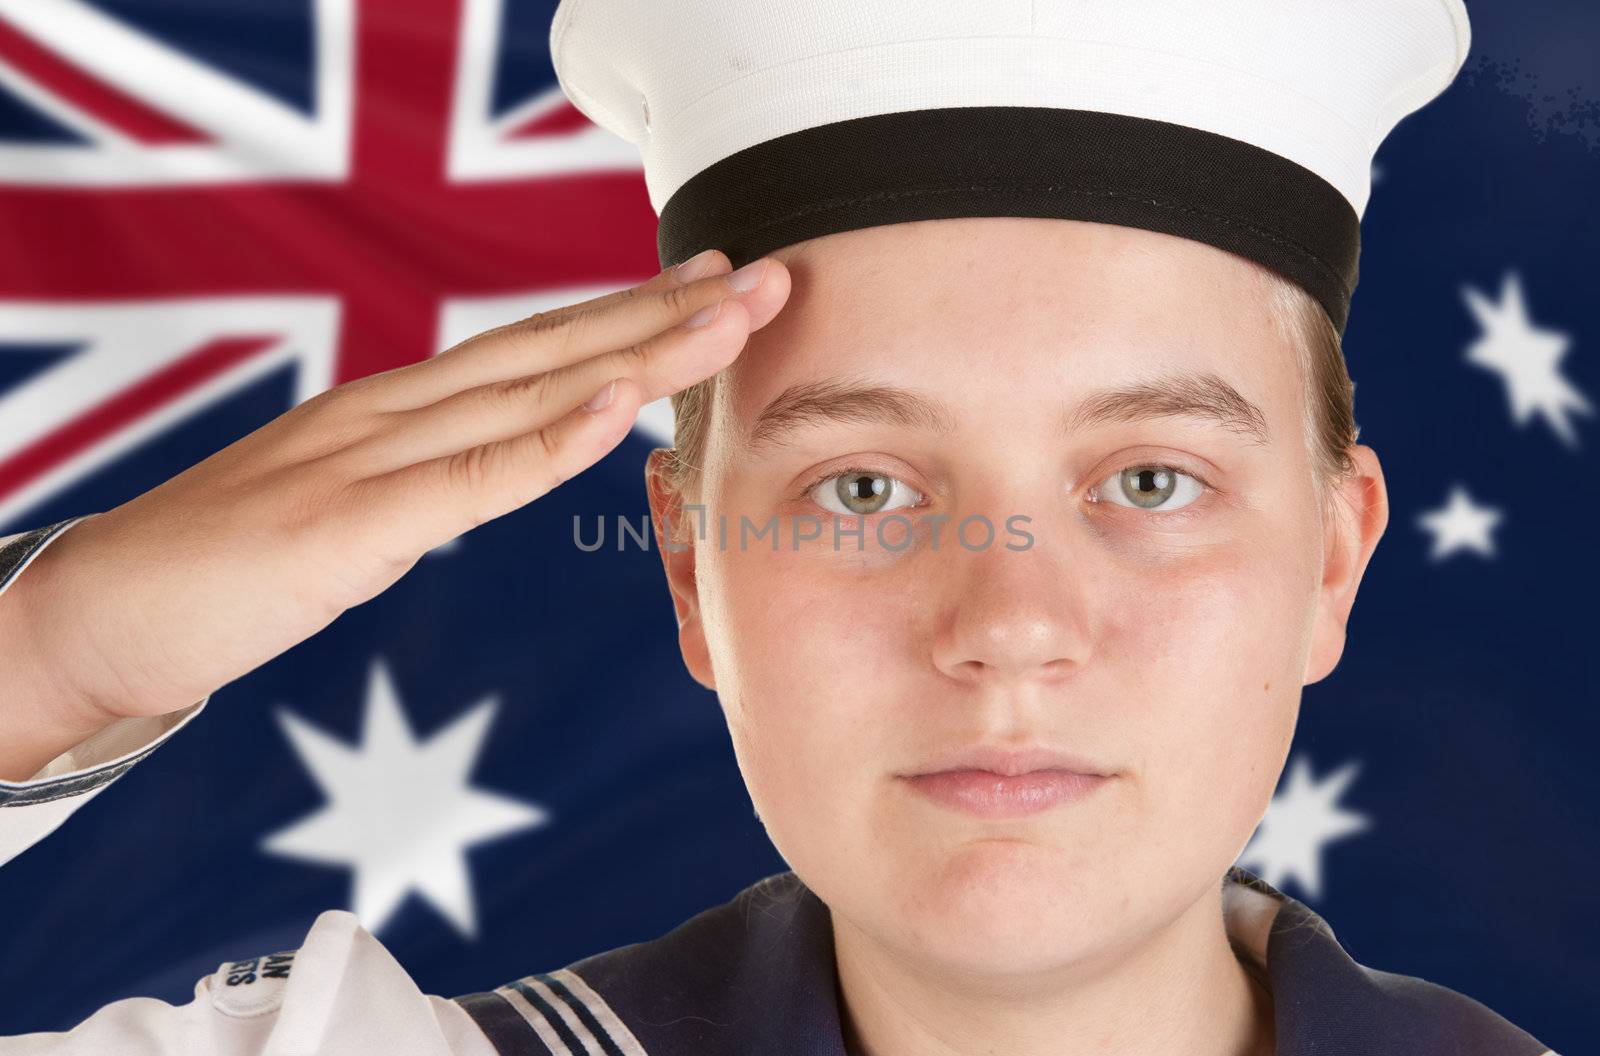 young female sailor saluting in front of australian flag